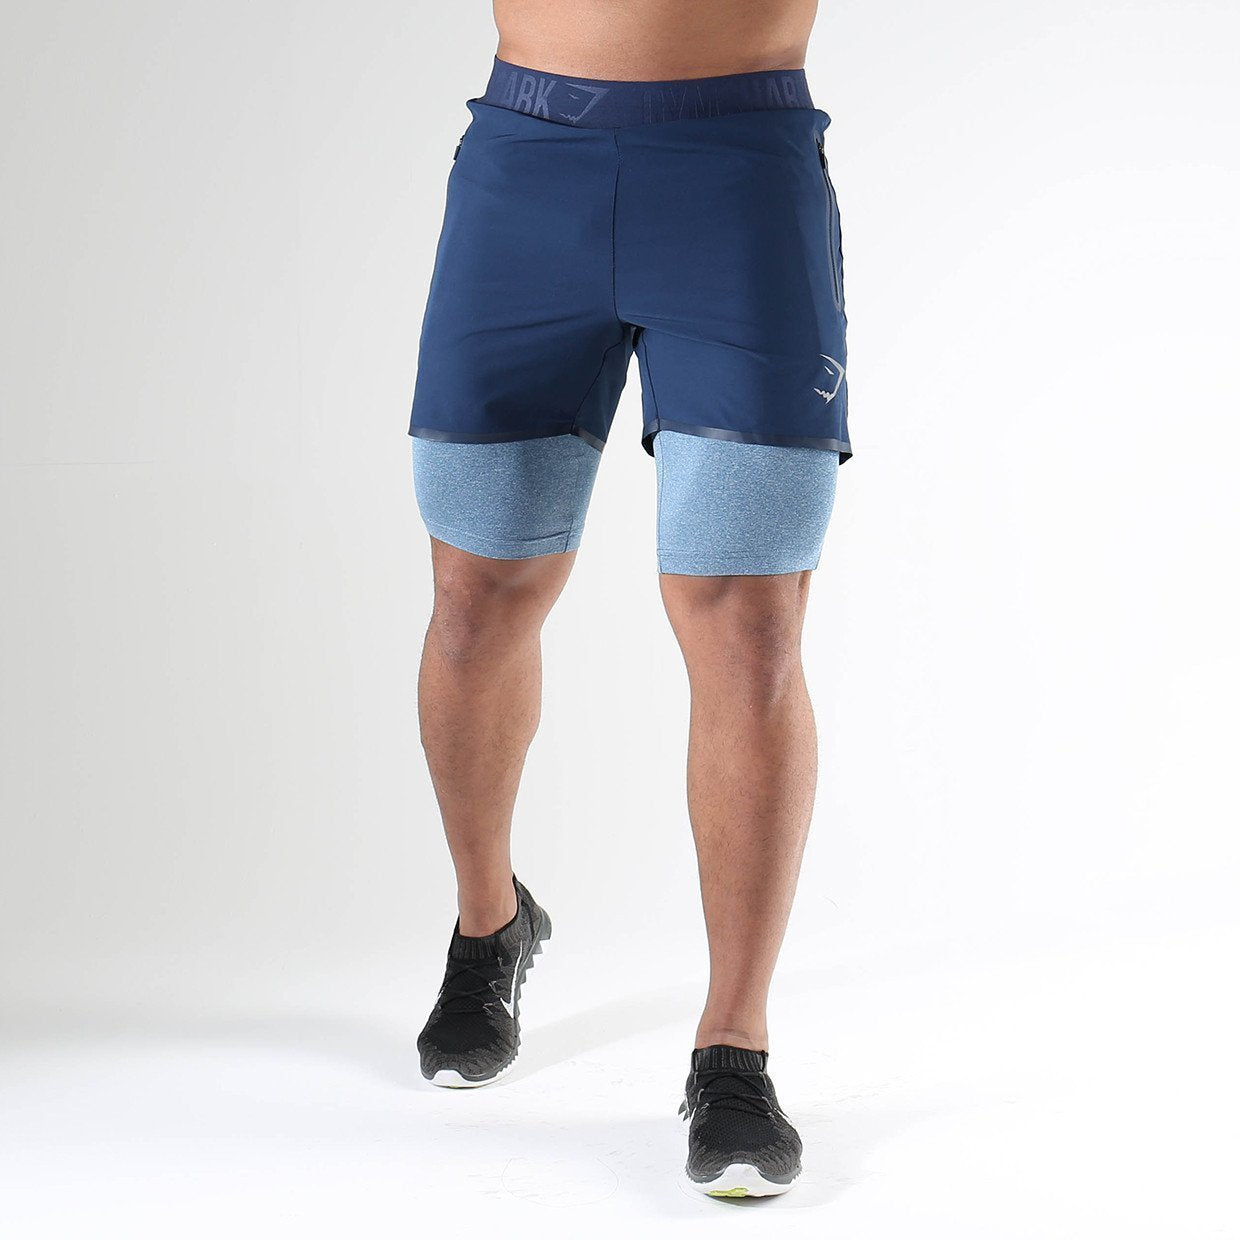 Enhance Shorts in Sapphire Blue - view 3